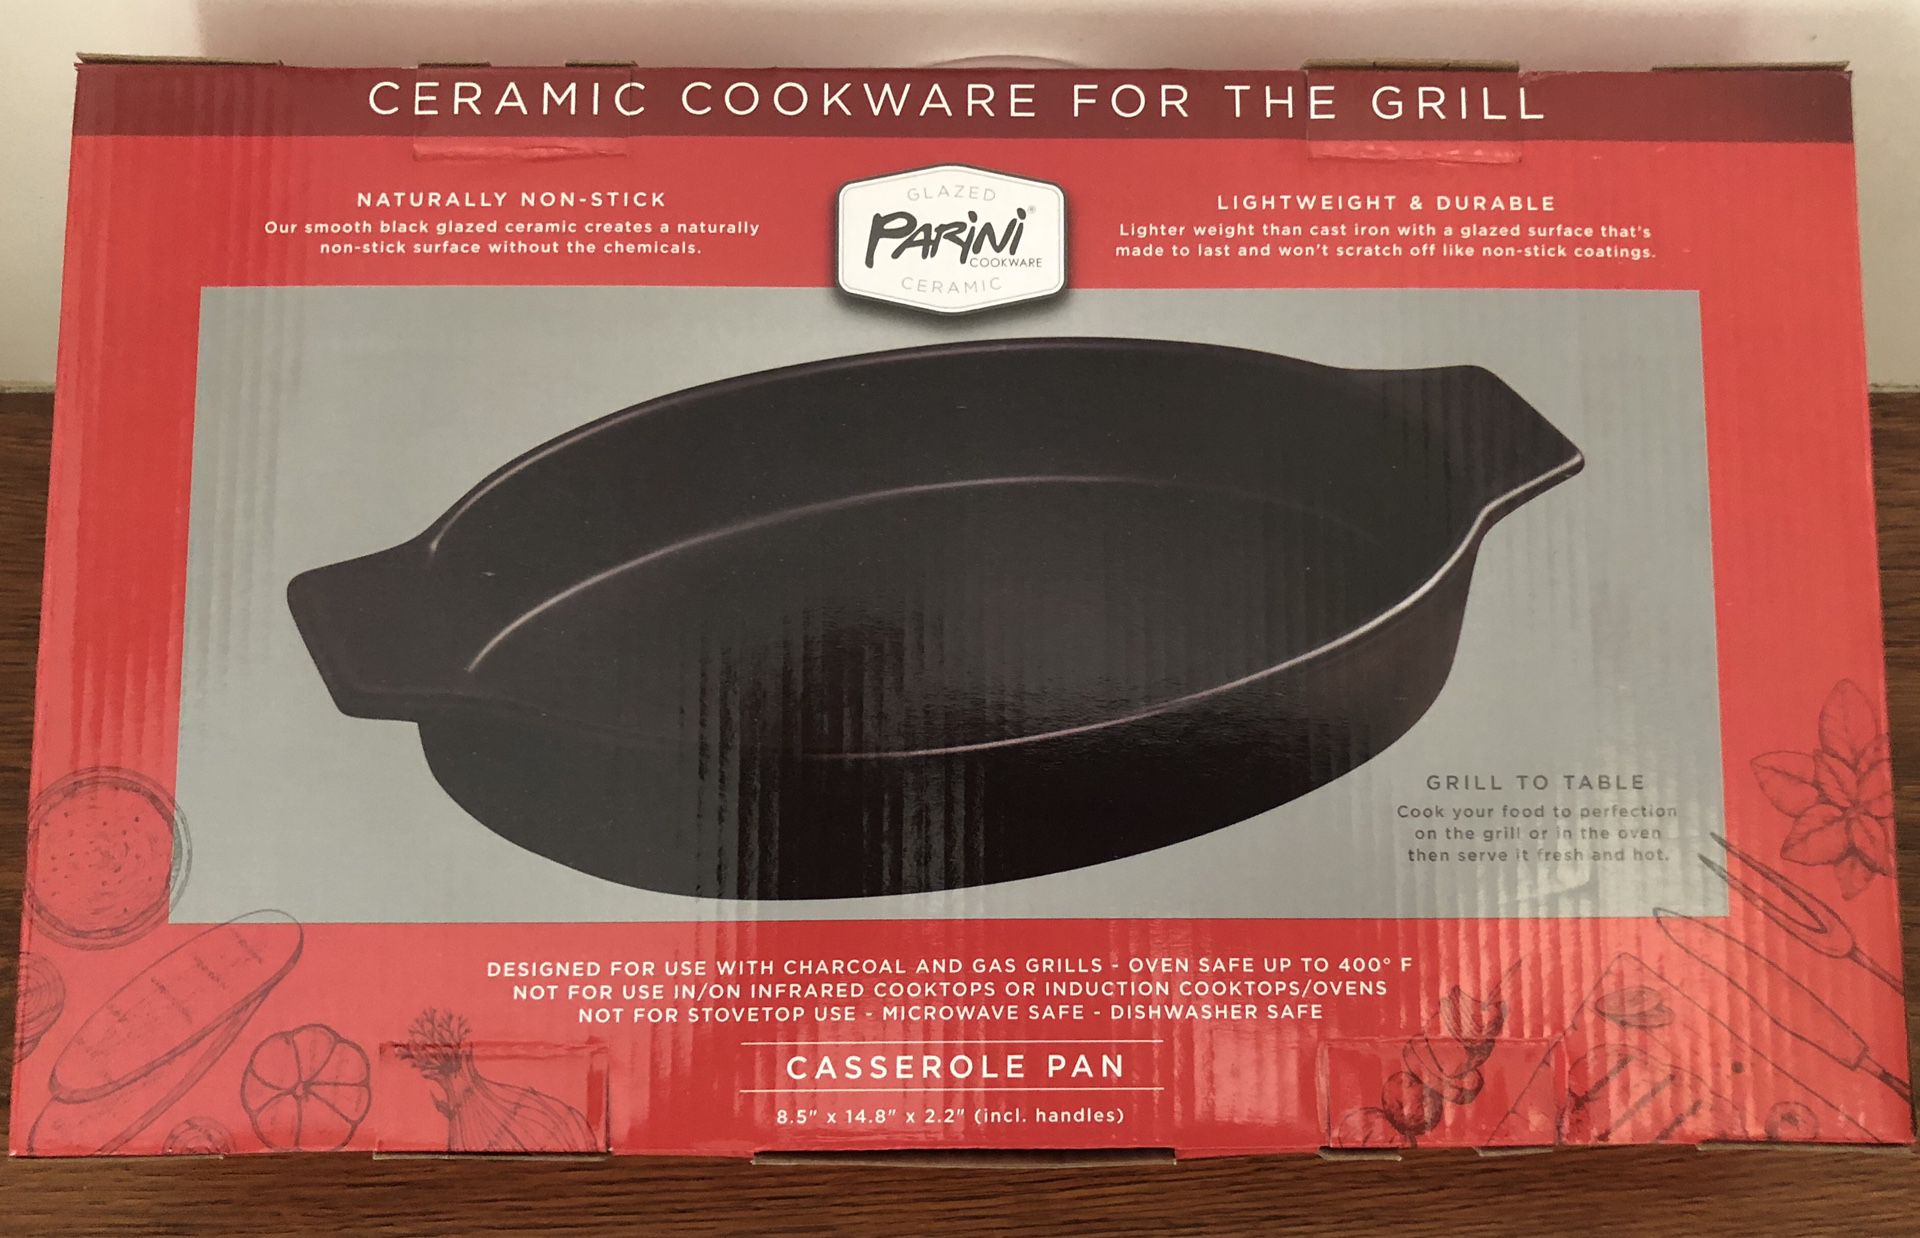 Ceramic Cookware for the Grill - Casserole Pan